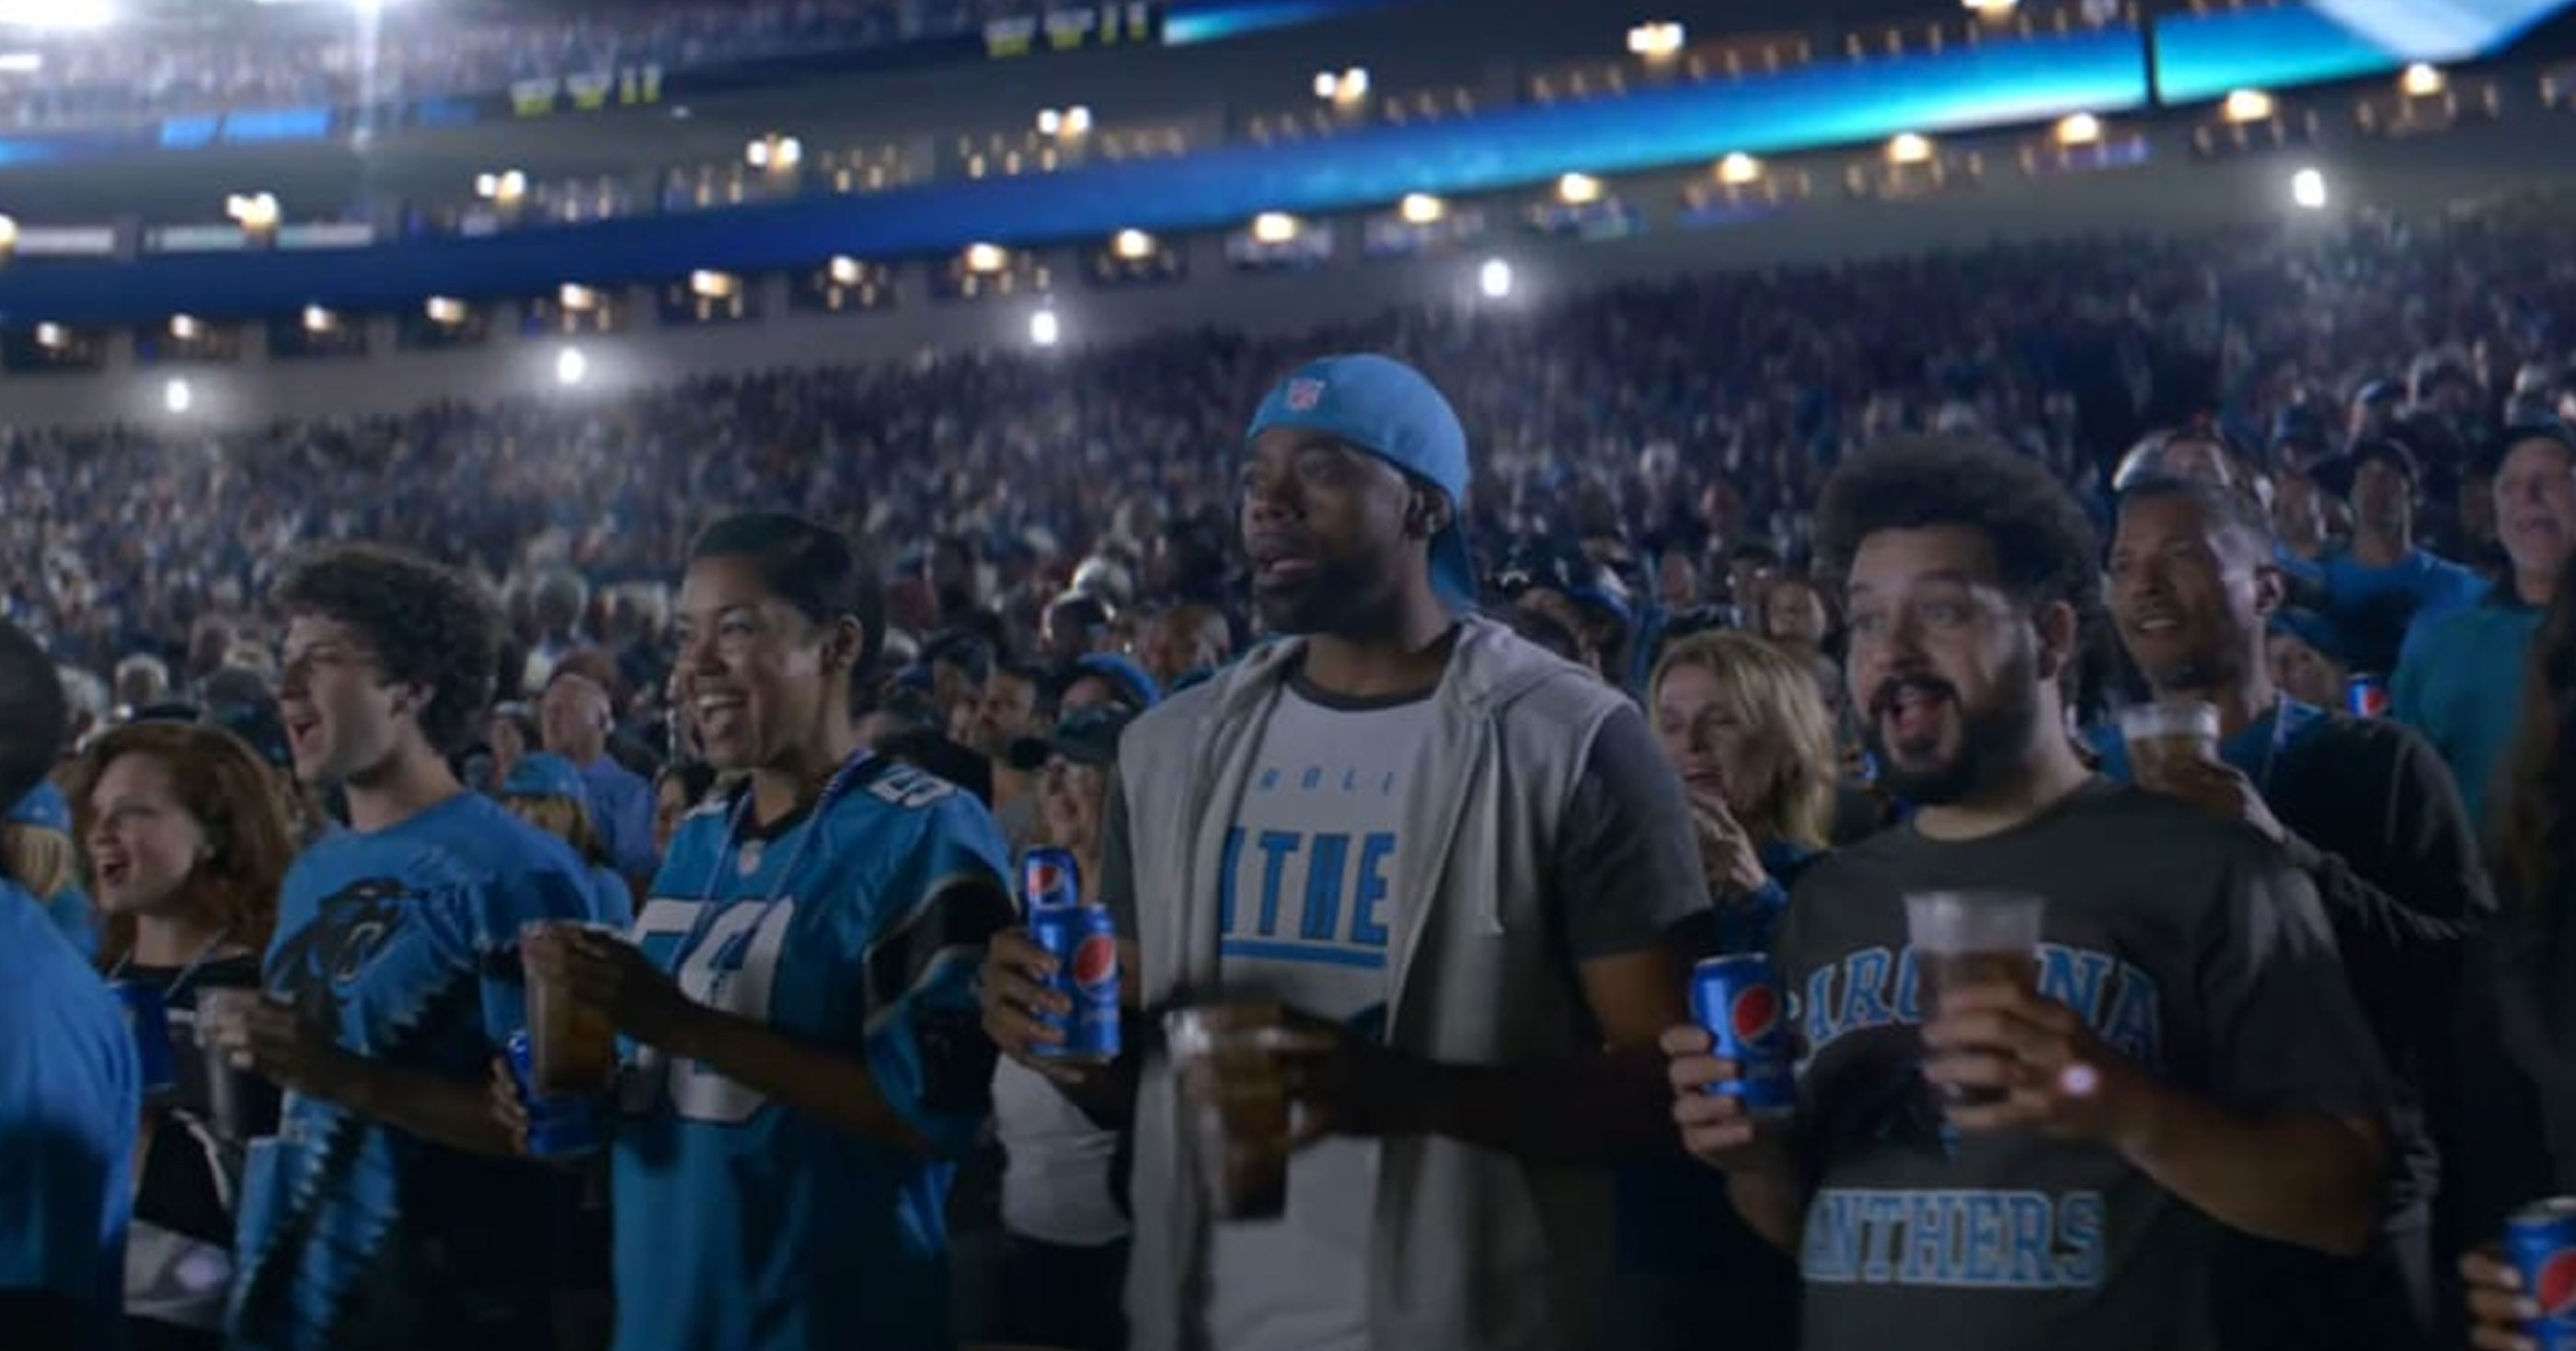 Someone Hilariously Remade Pepsi S Ice The Kicker Commercial To